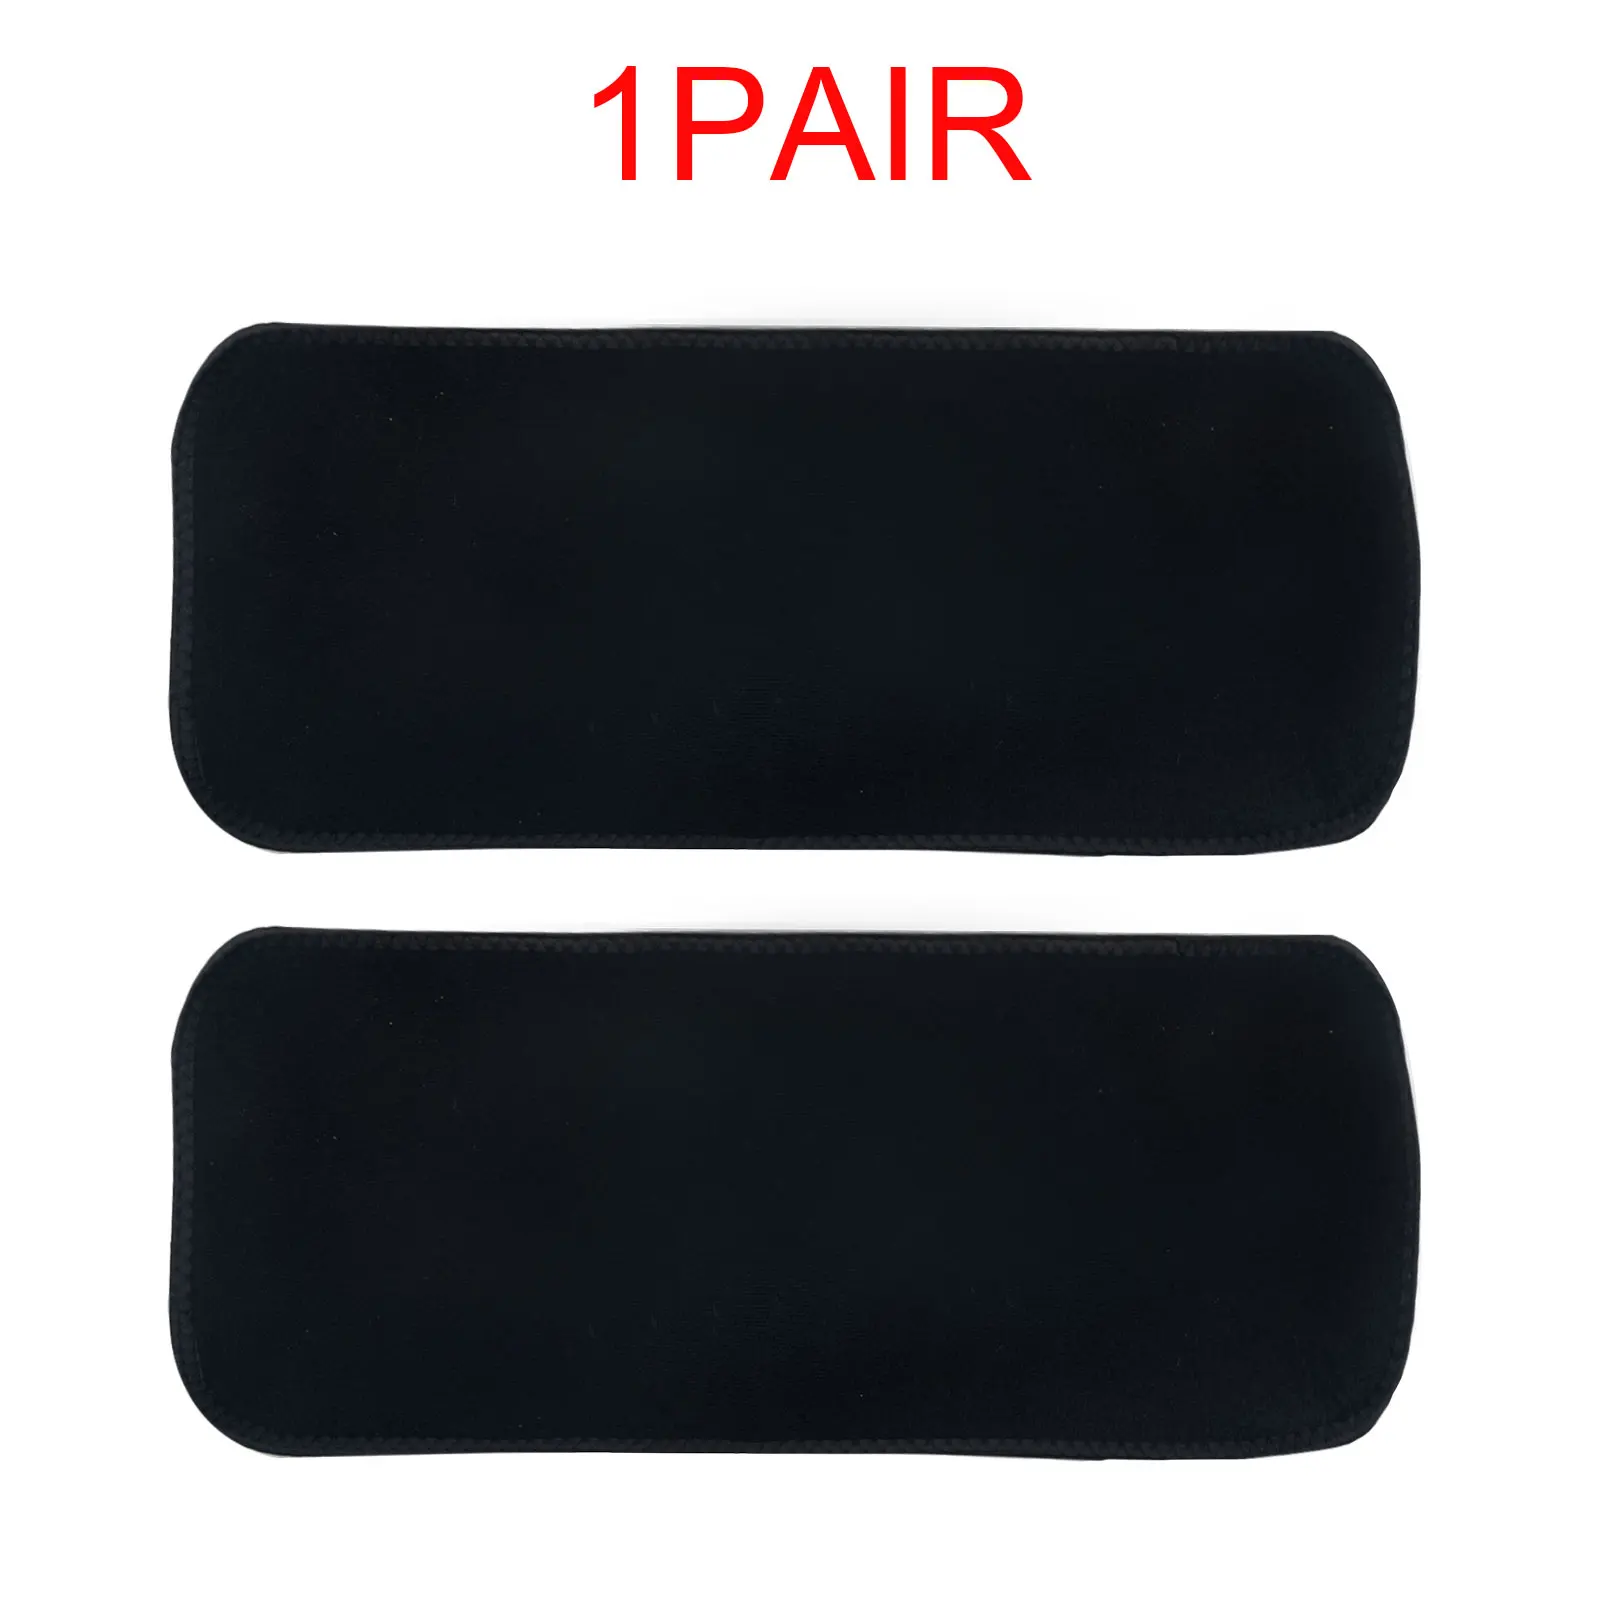 

1pair Women Arm Trimmers Adjustable Workout Sweat Band Wraps Weight Loss Slimmer Sports Sauna Shaper Fat Burning Yoga Trainer